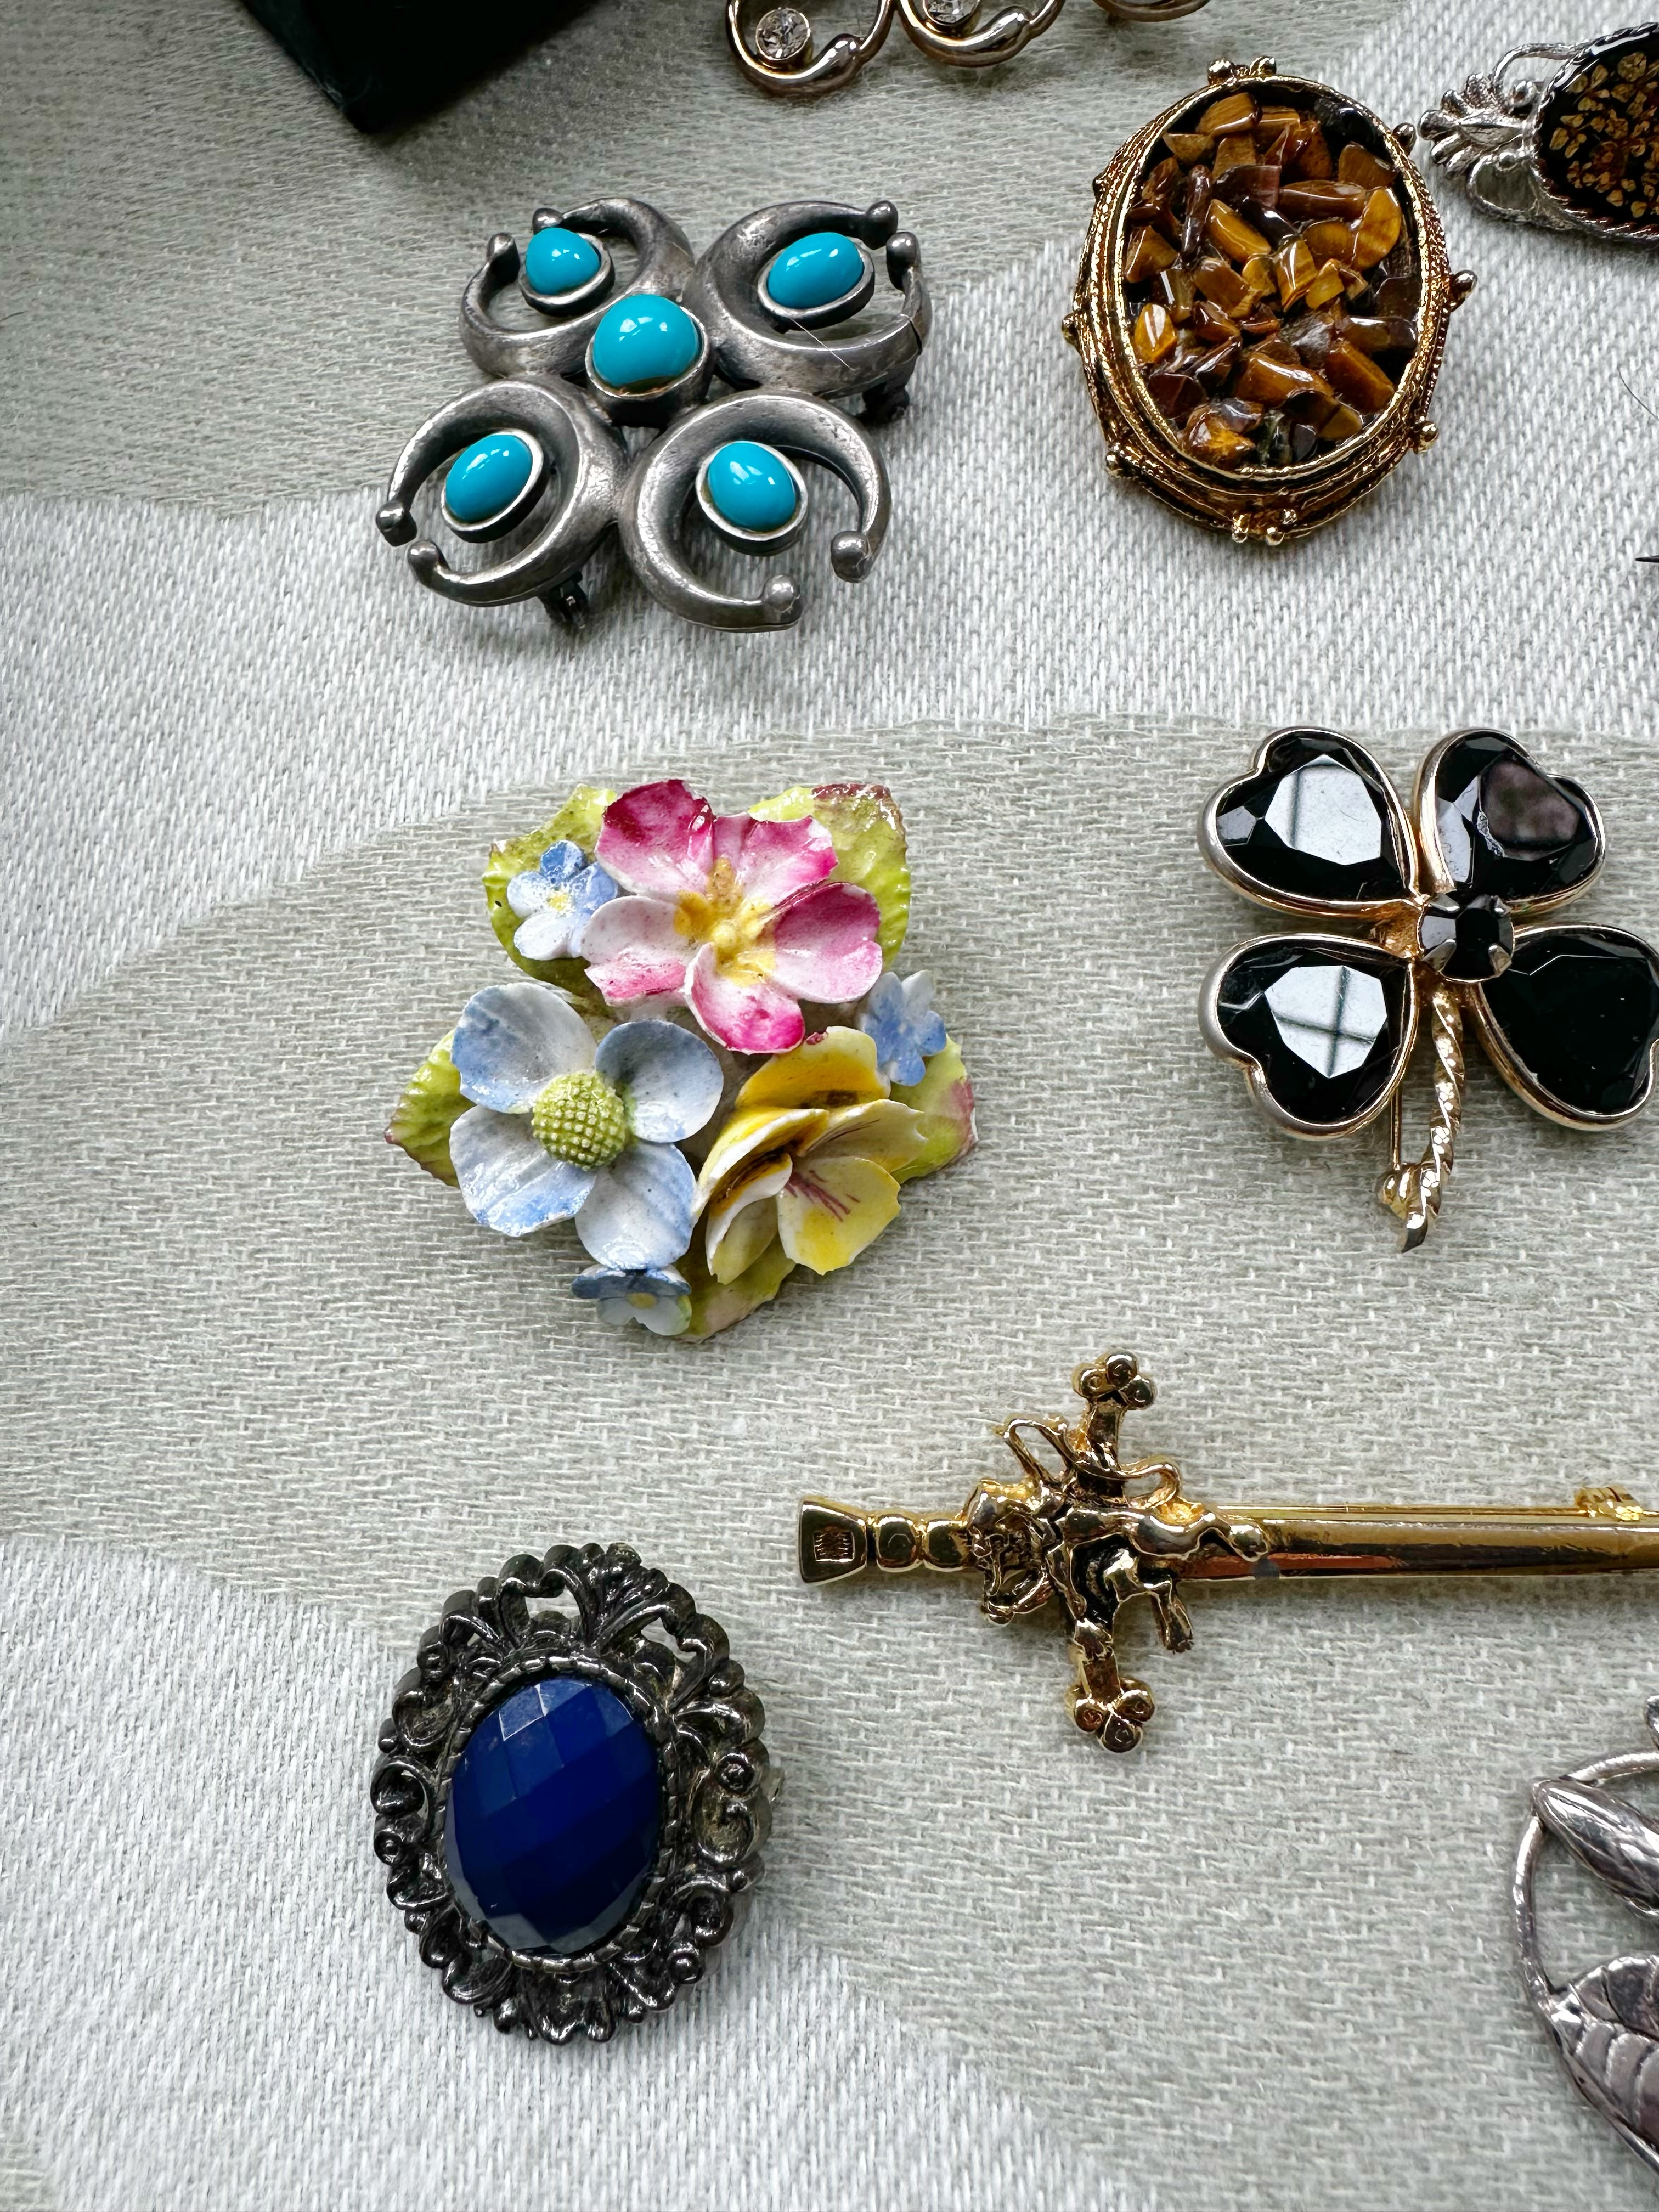 Vintage Brooches - Image 6 of 7